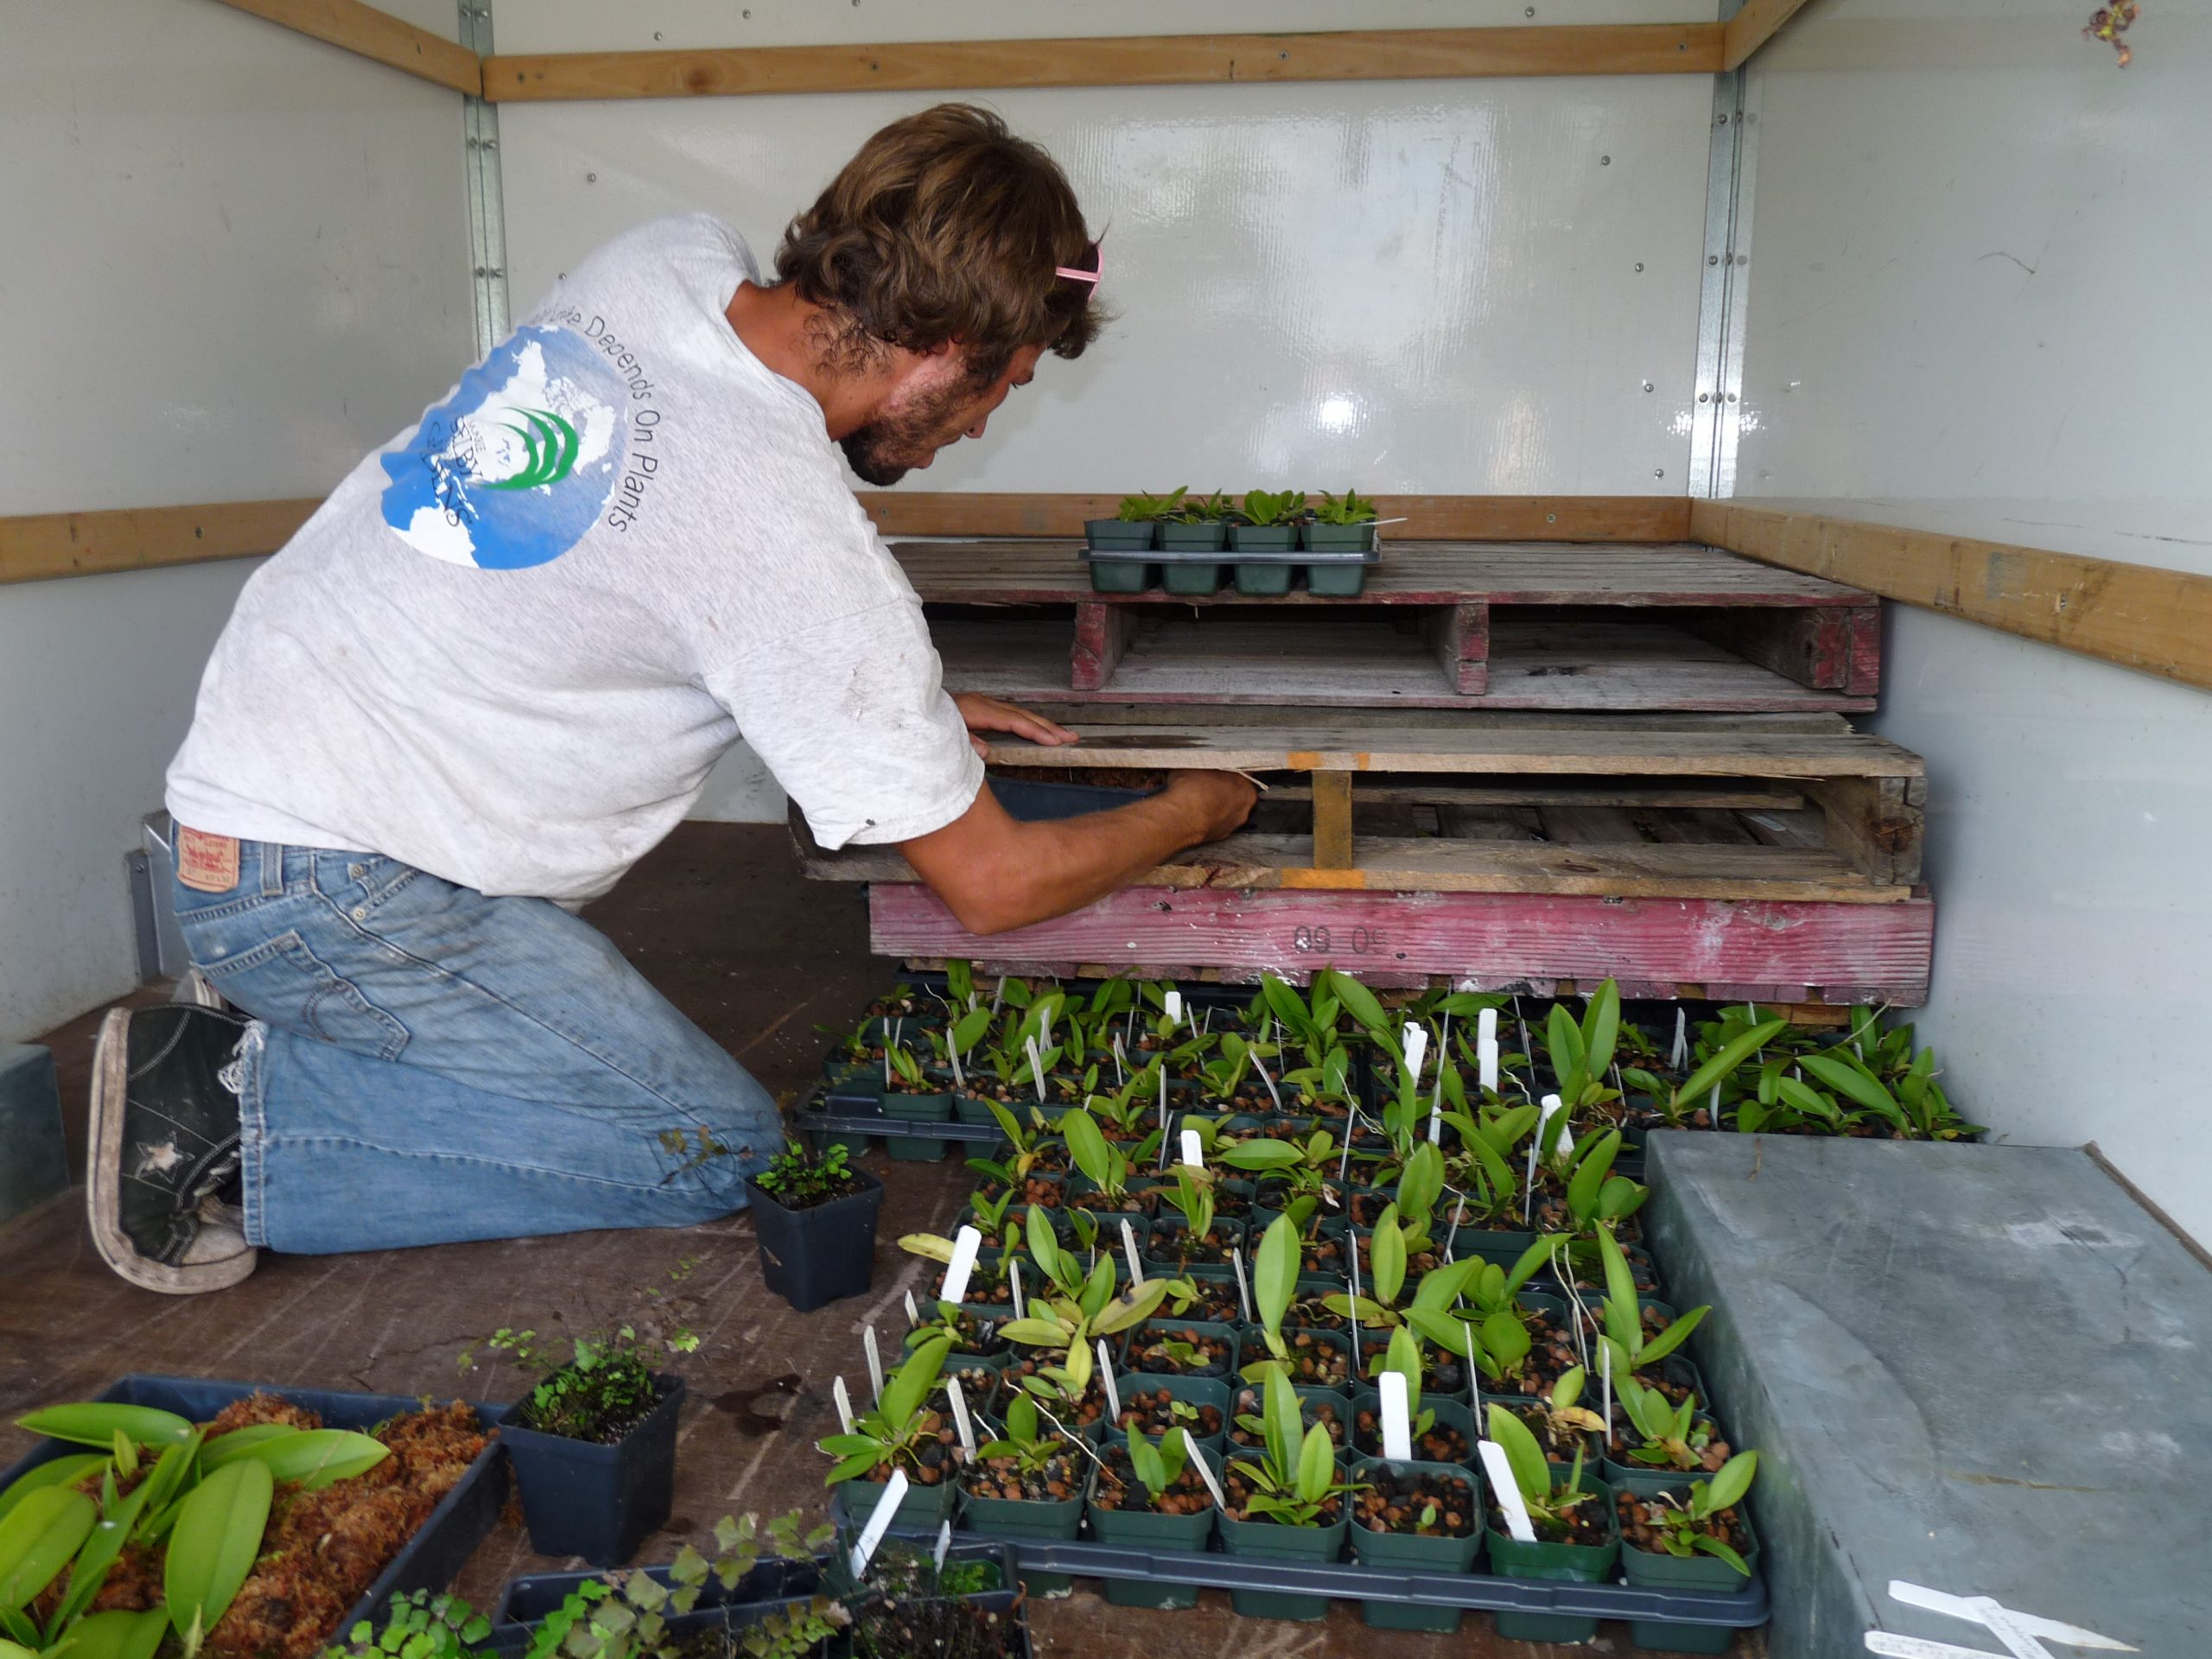 Horticulture staff preparing shipment of young spotted mule eared orchids (Trichocentrum undulatum) to Everglades National Park for augmentation project in 2011.